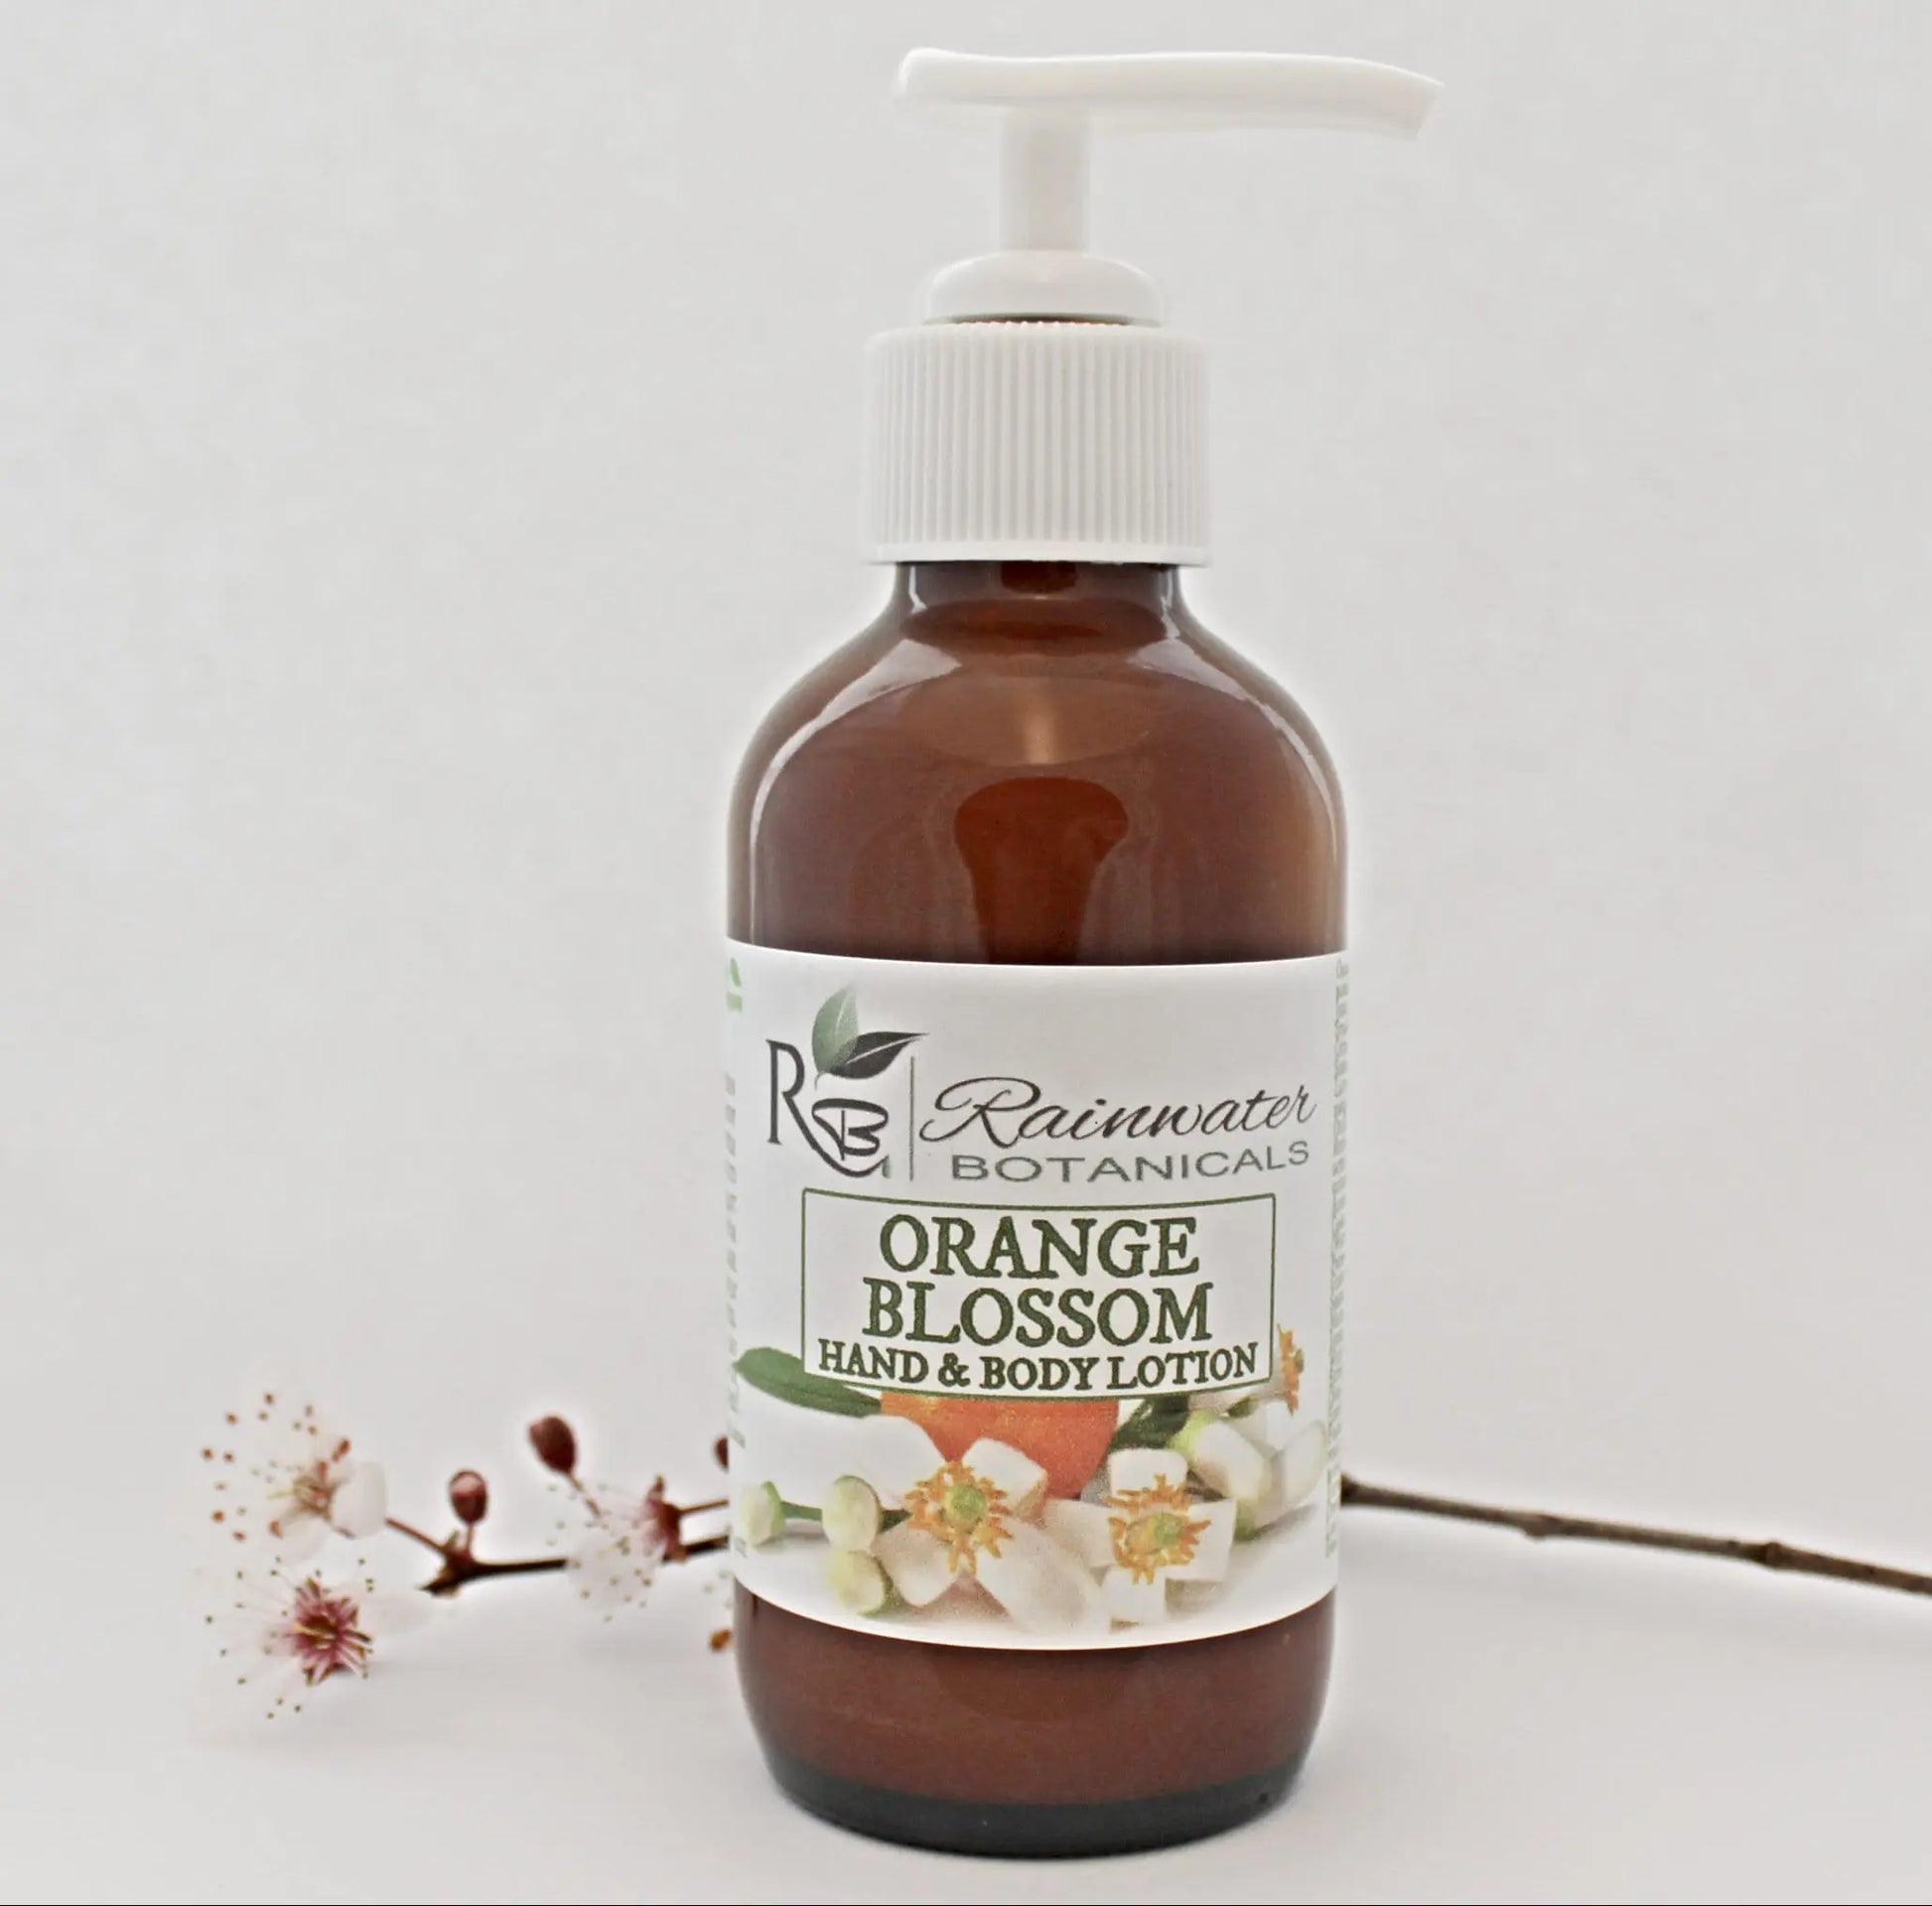 Natural Hand & Body Lotion